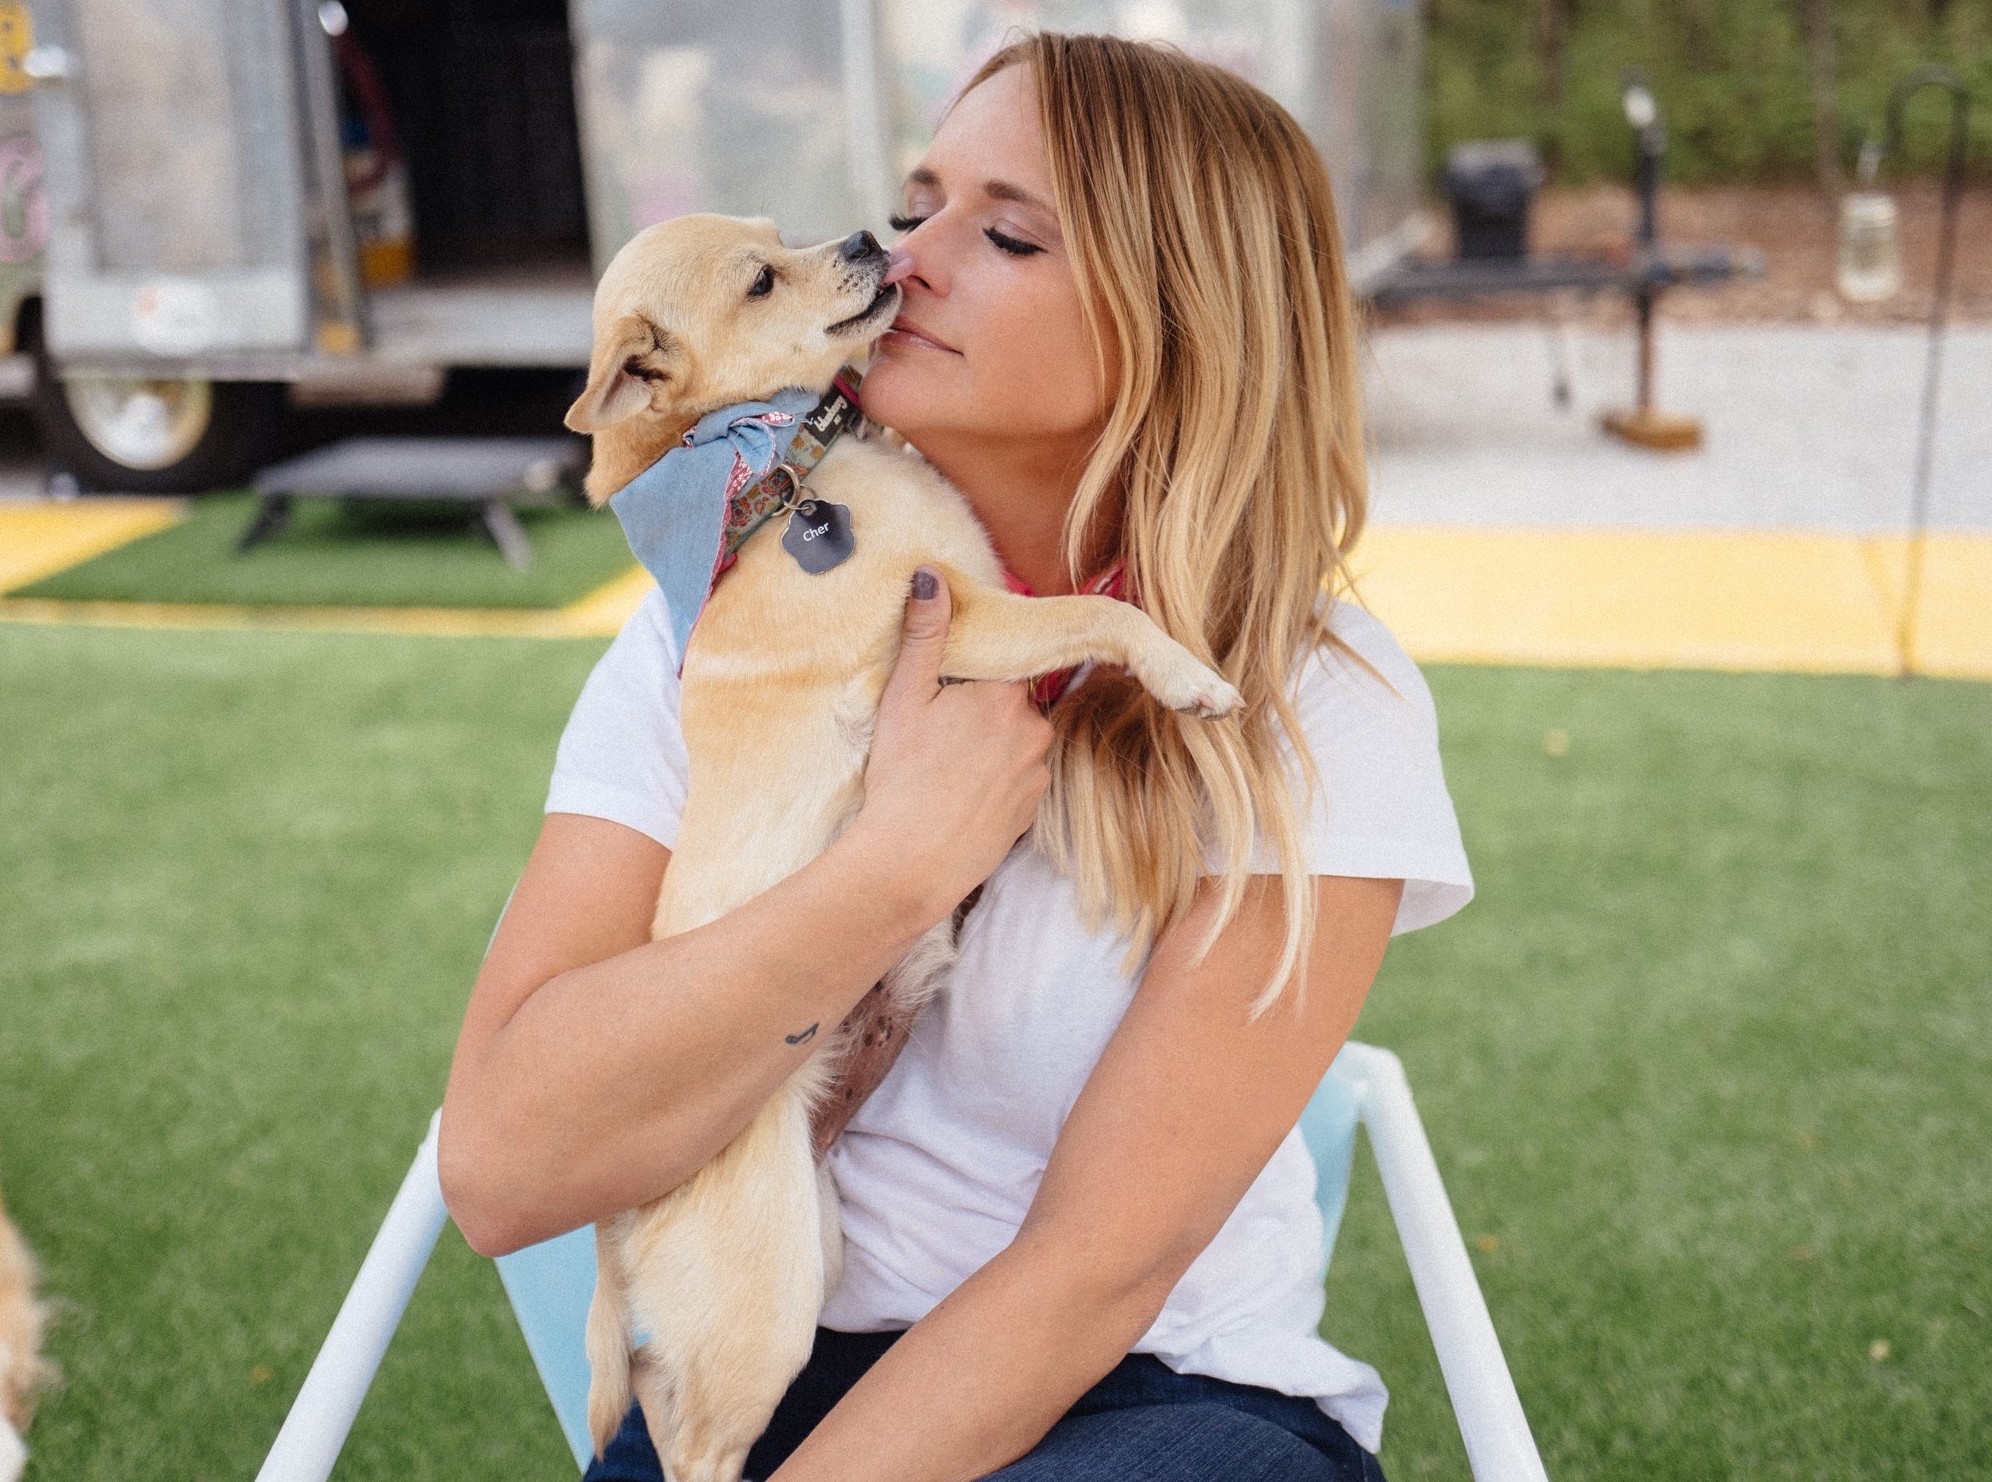 Miranda Lambert Combines Her Passion for Music and Mutts on Livin’ Like Hippies Tour